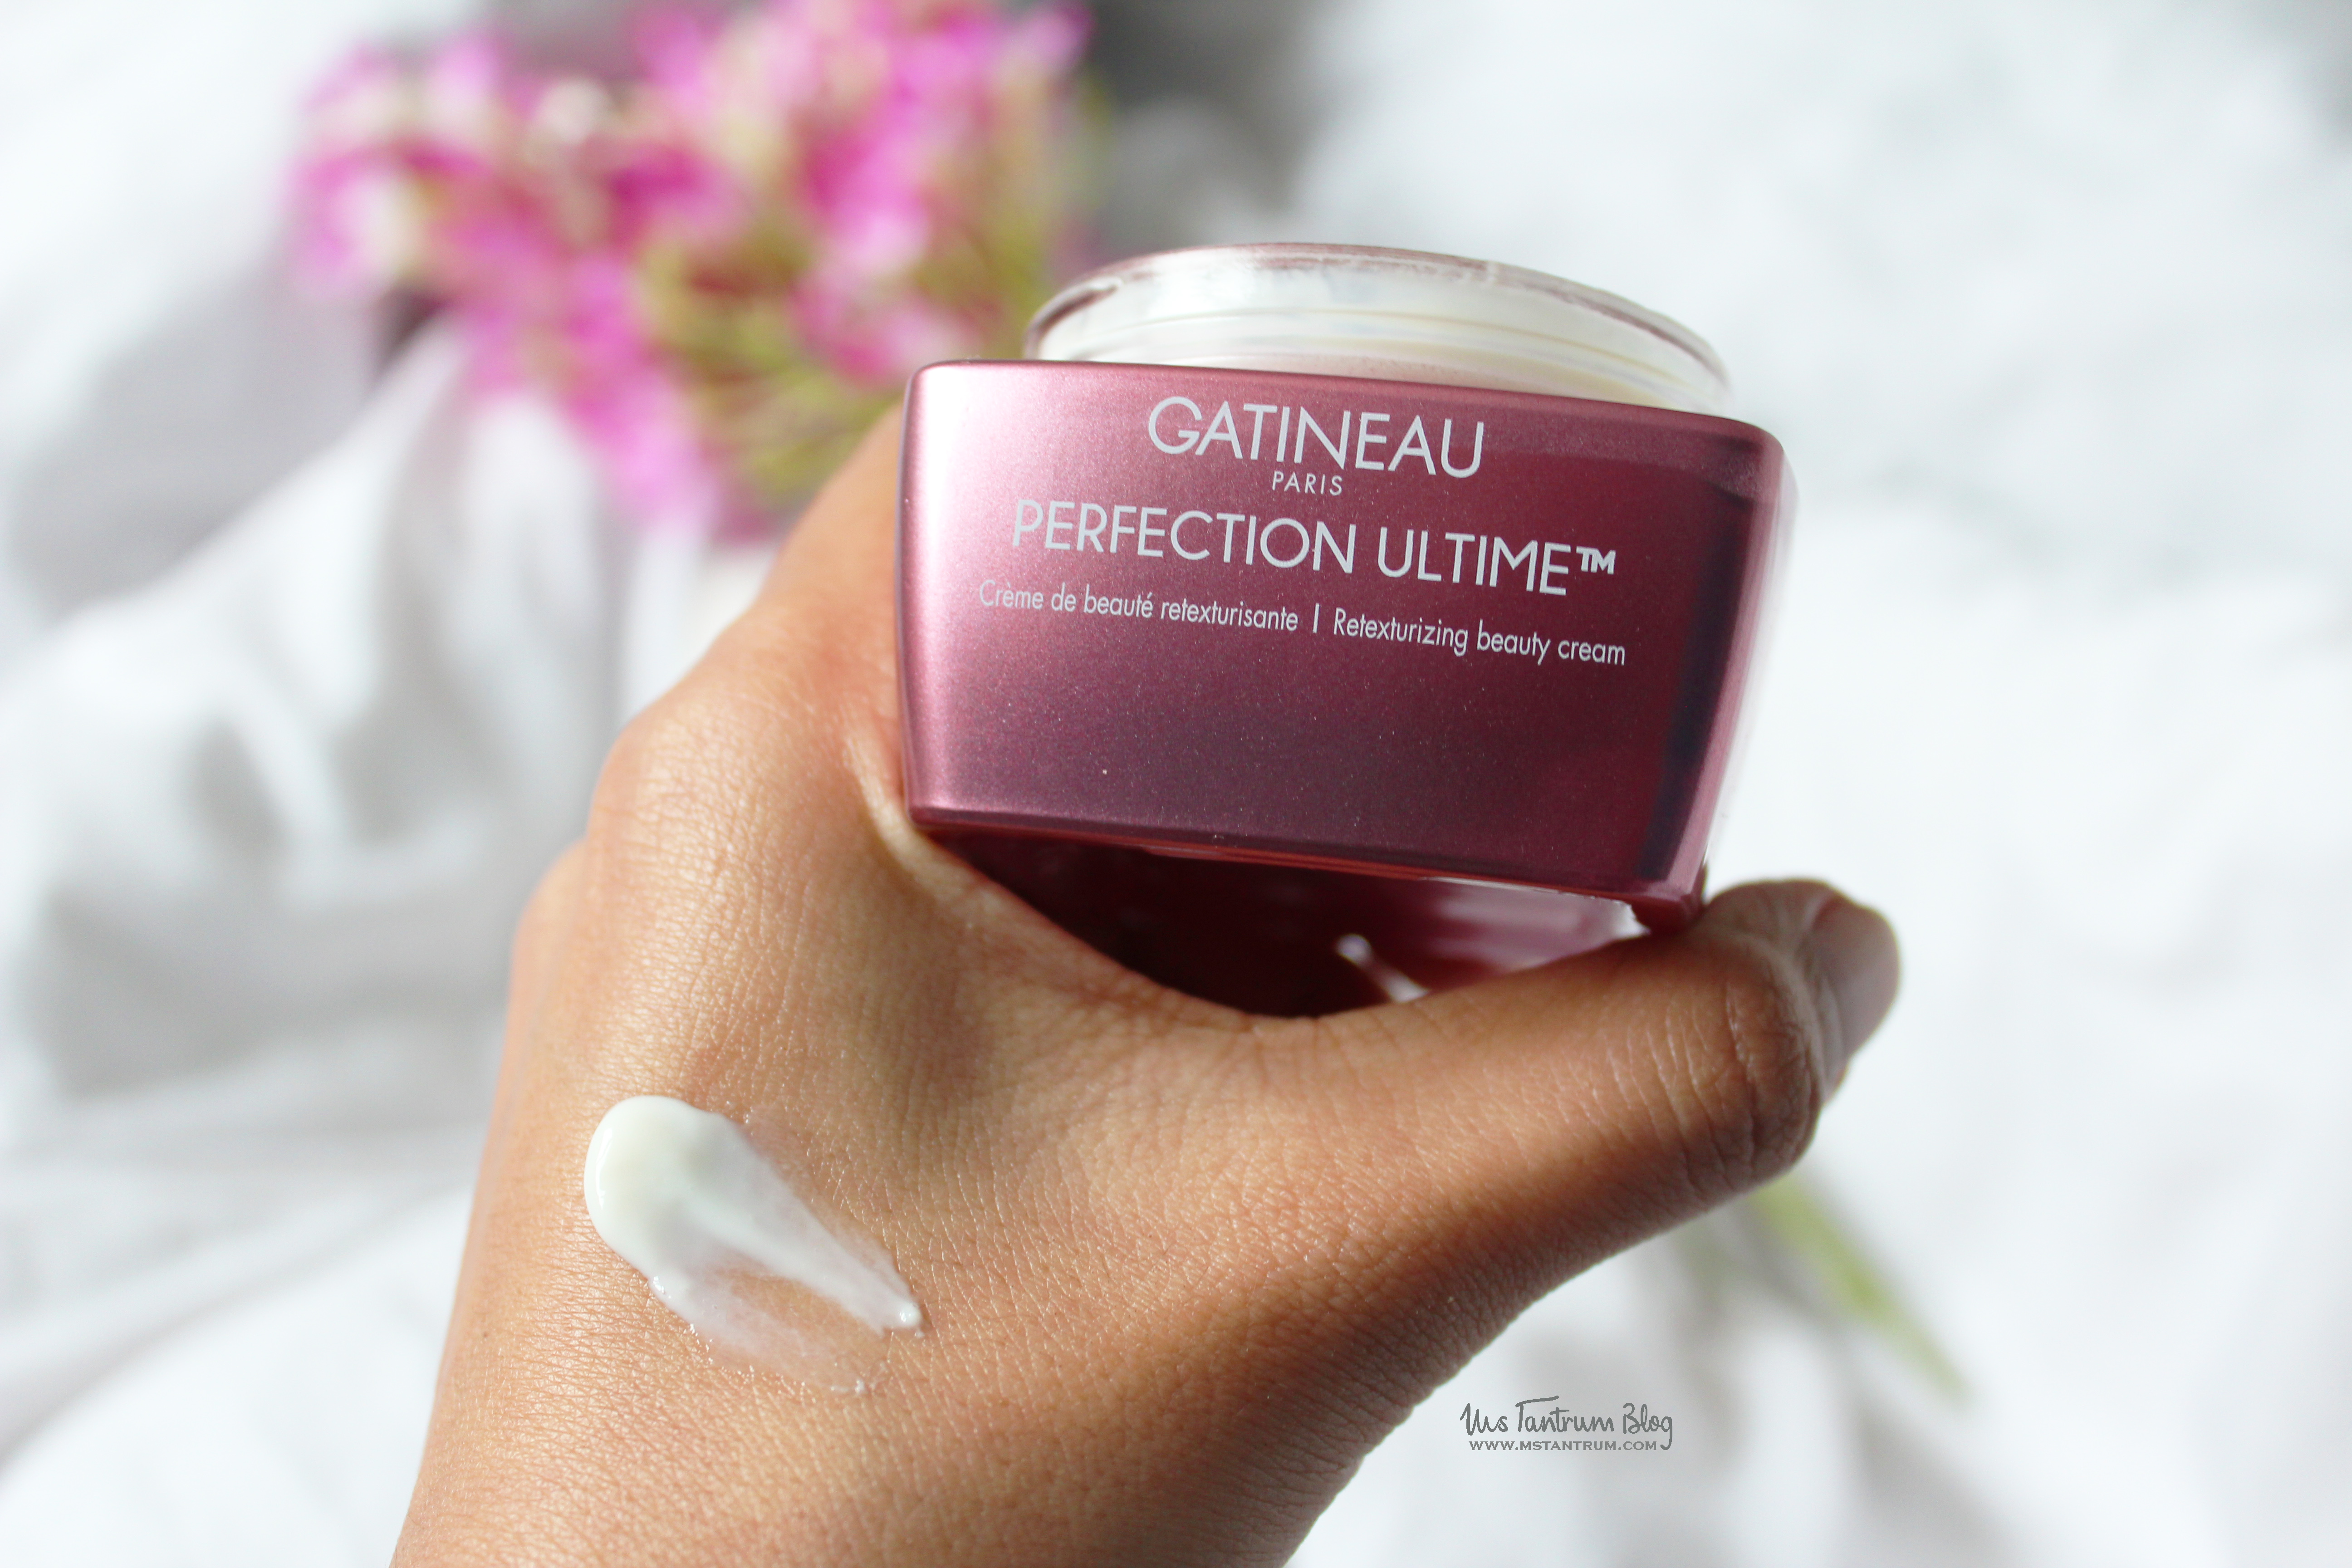 Gatineau Perfection Ultime Retexturizing Beauty Cream Review 